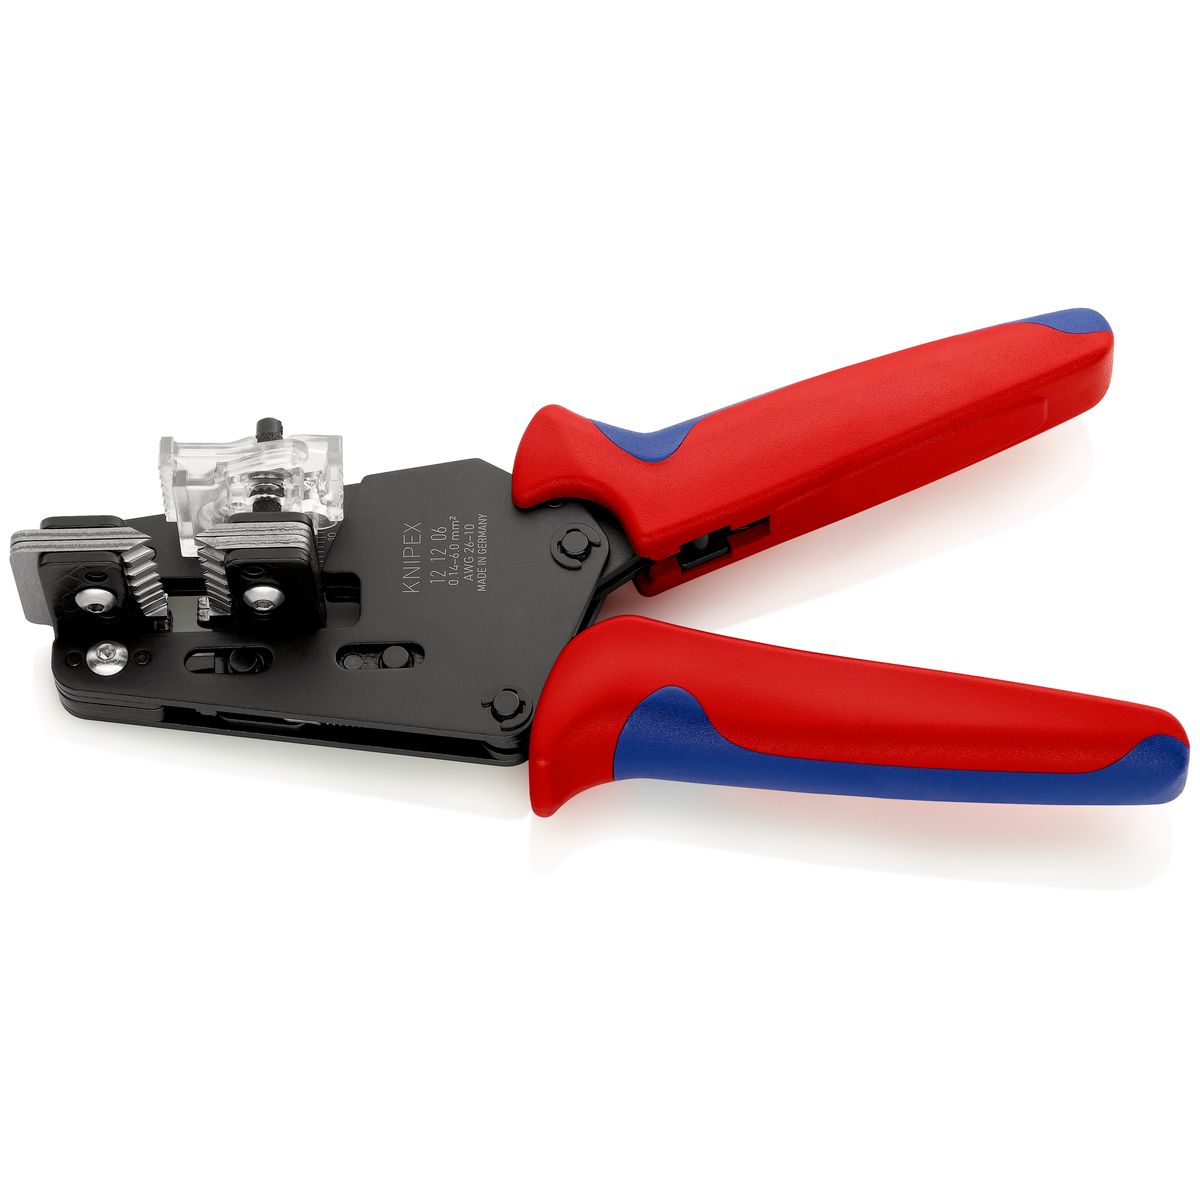 Precision Insulation Strippers 121206 Knipex